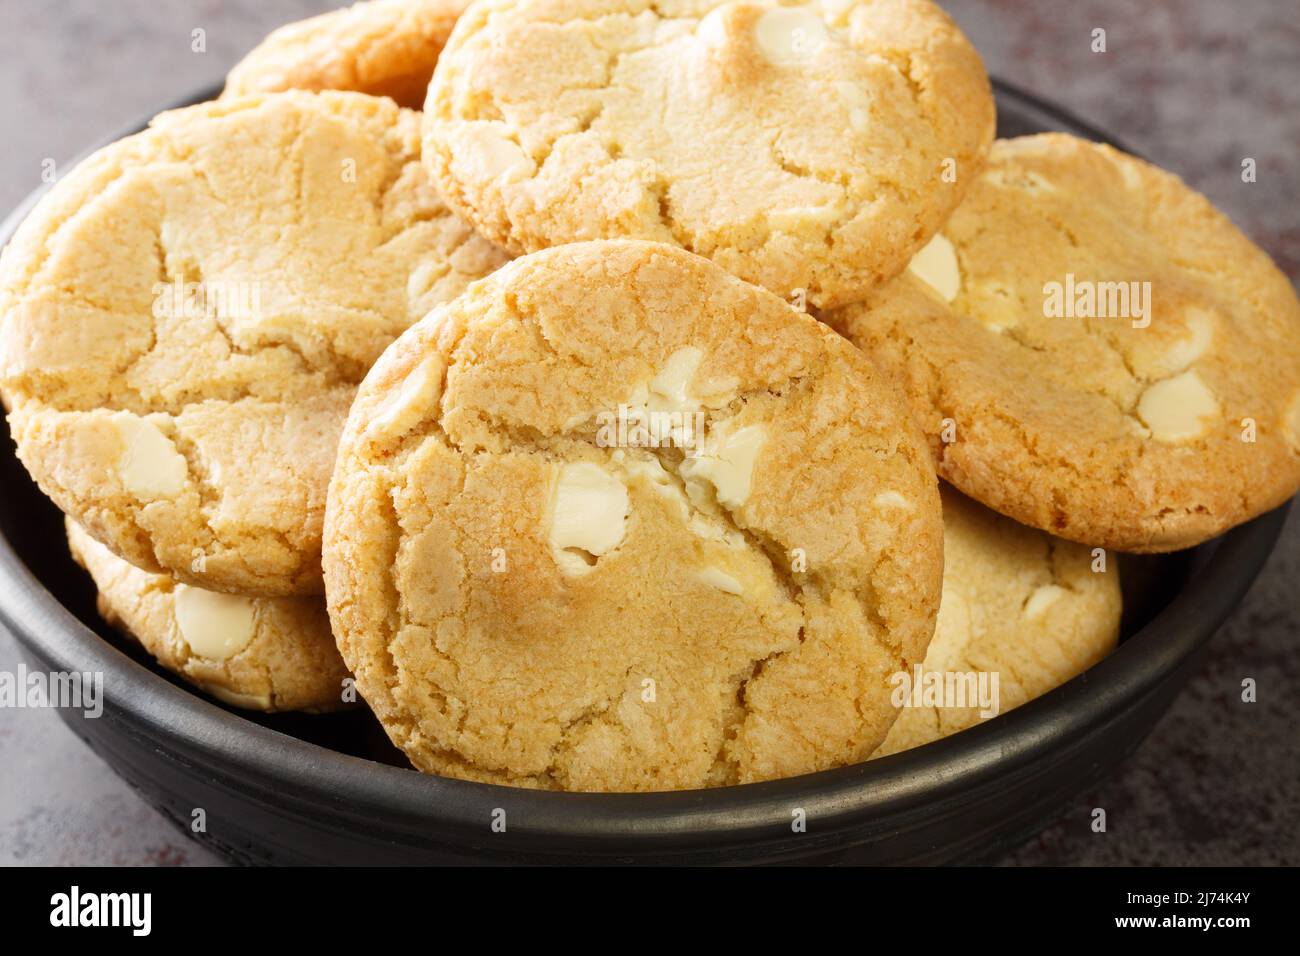 pile of white chocolate chip and macadamia nut cookies on the table close-up. Horizontal Stock Photo